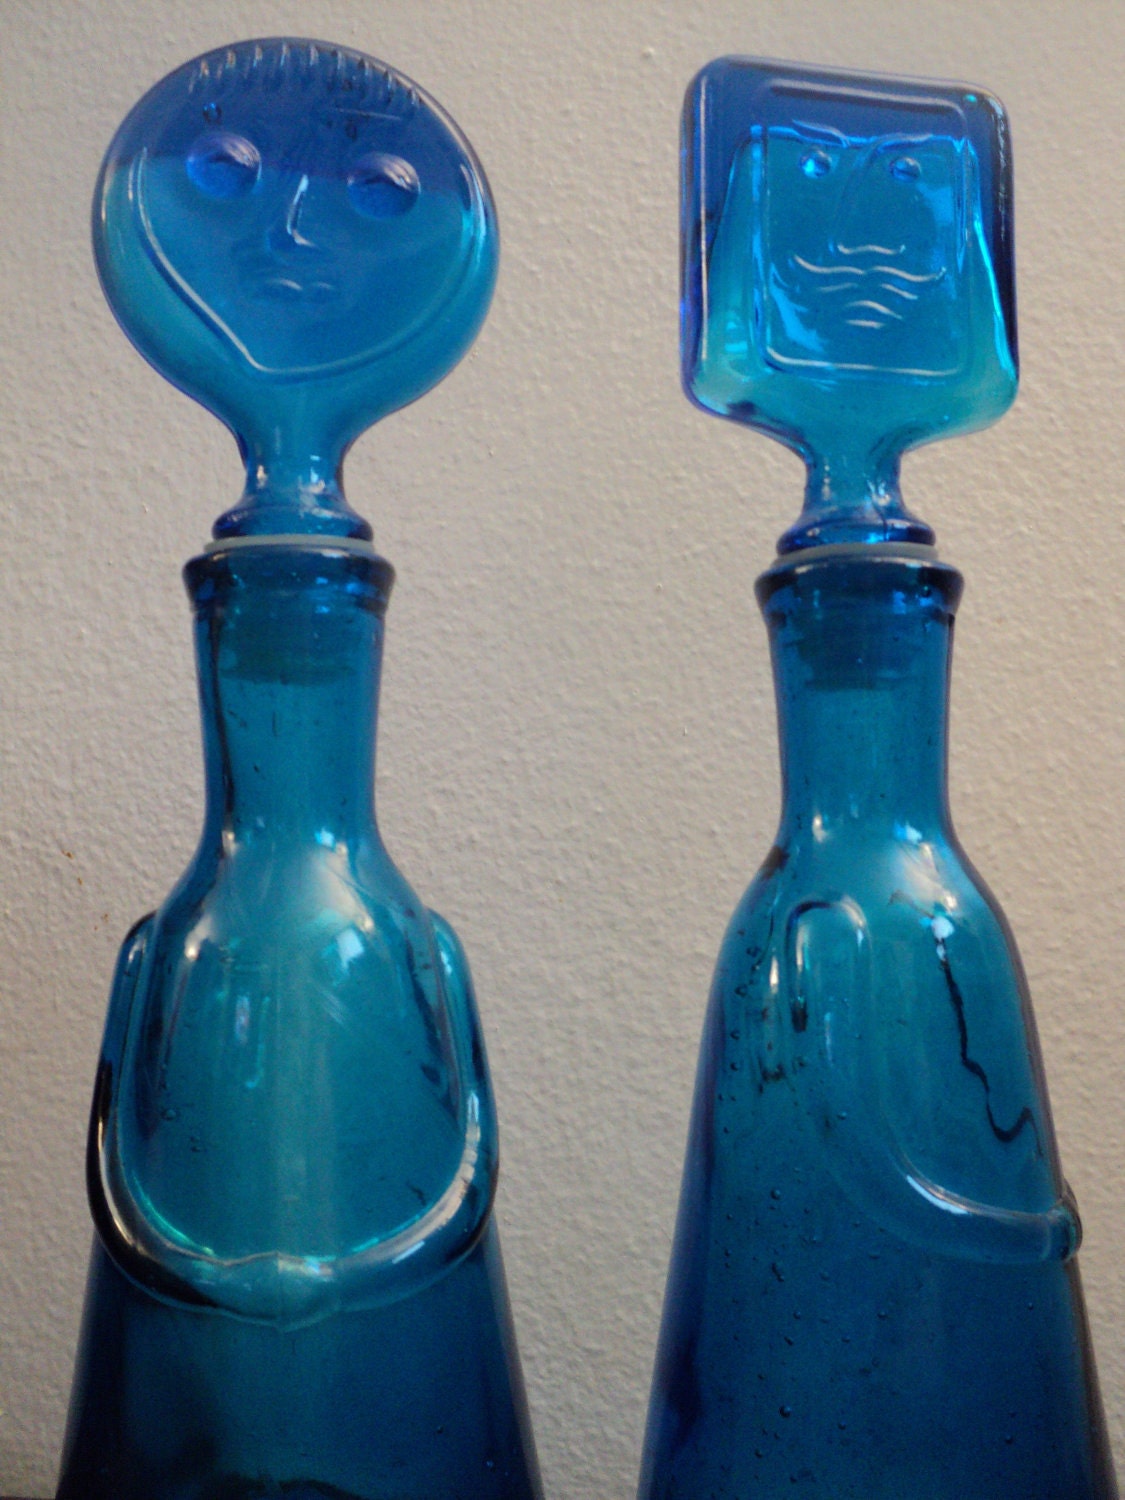 1960's Erik Hoglund style blue glass people bottles decanters